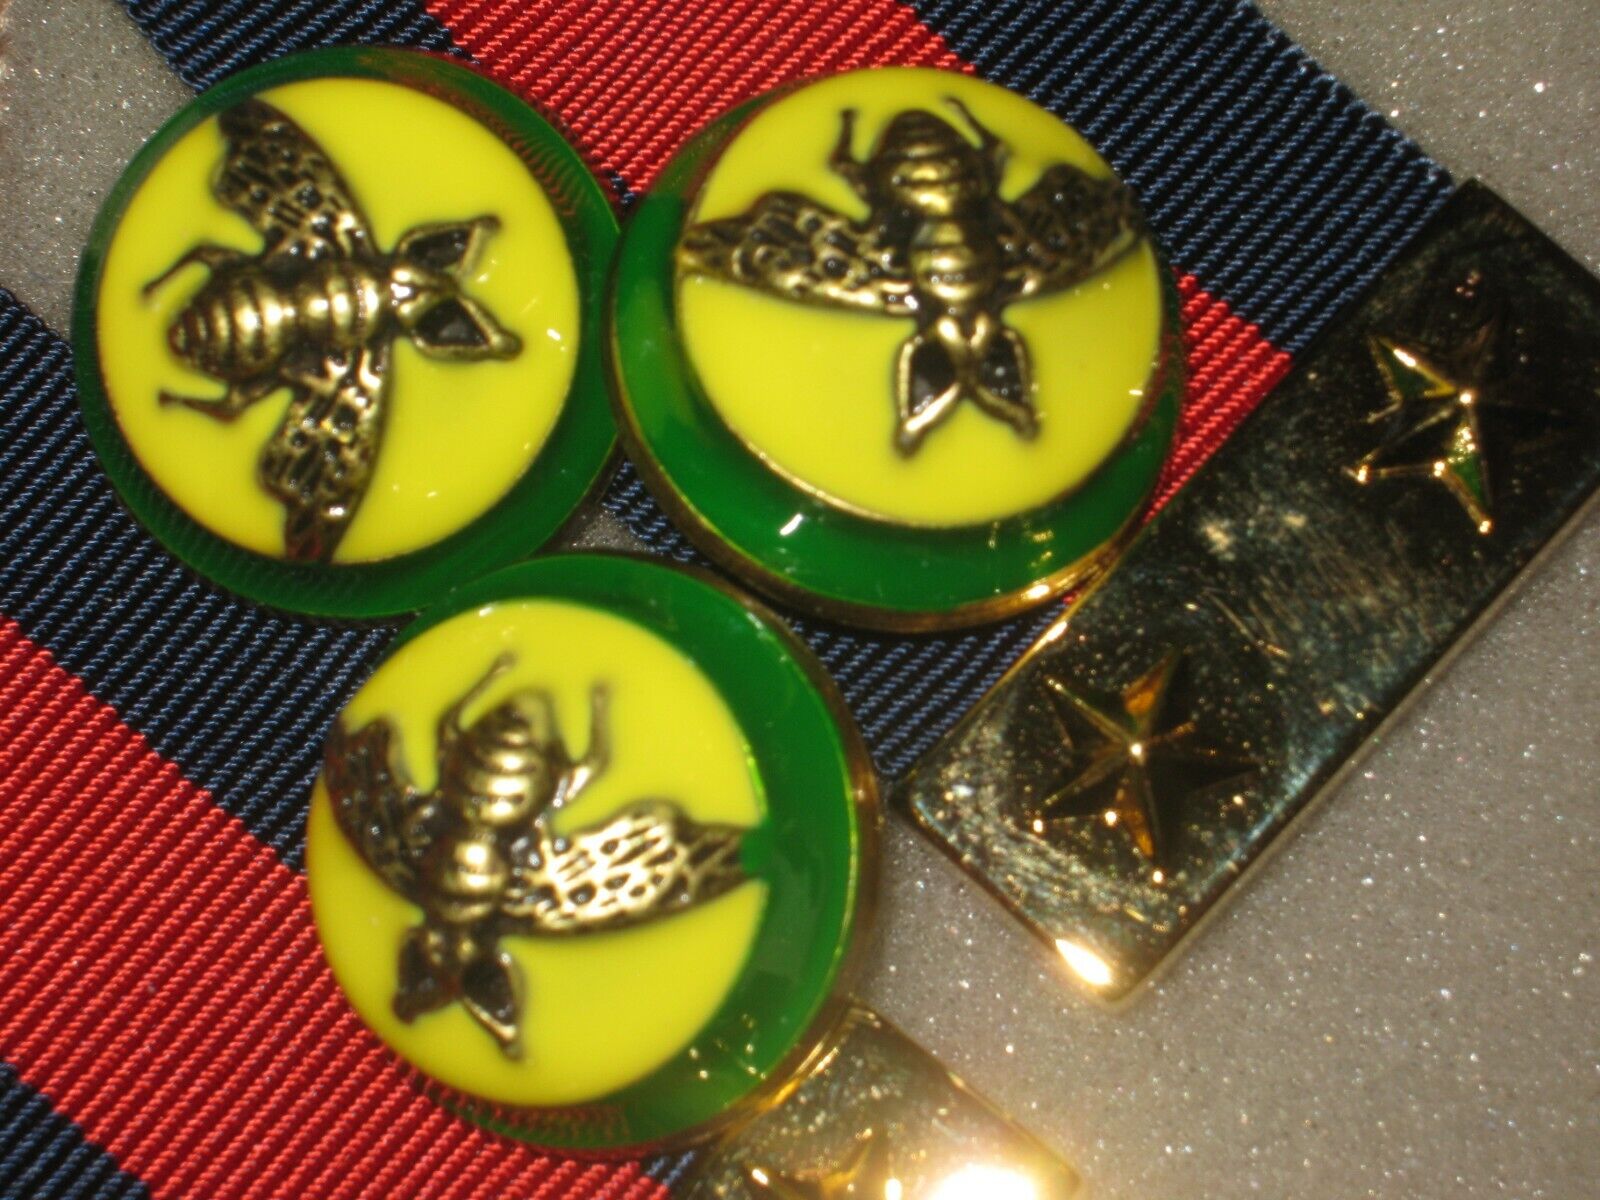 Gucci 3 buttons green yellow bees 23 mm dome BUTTON THIS IS FOR three